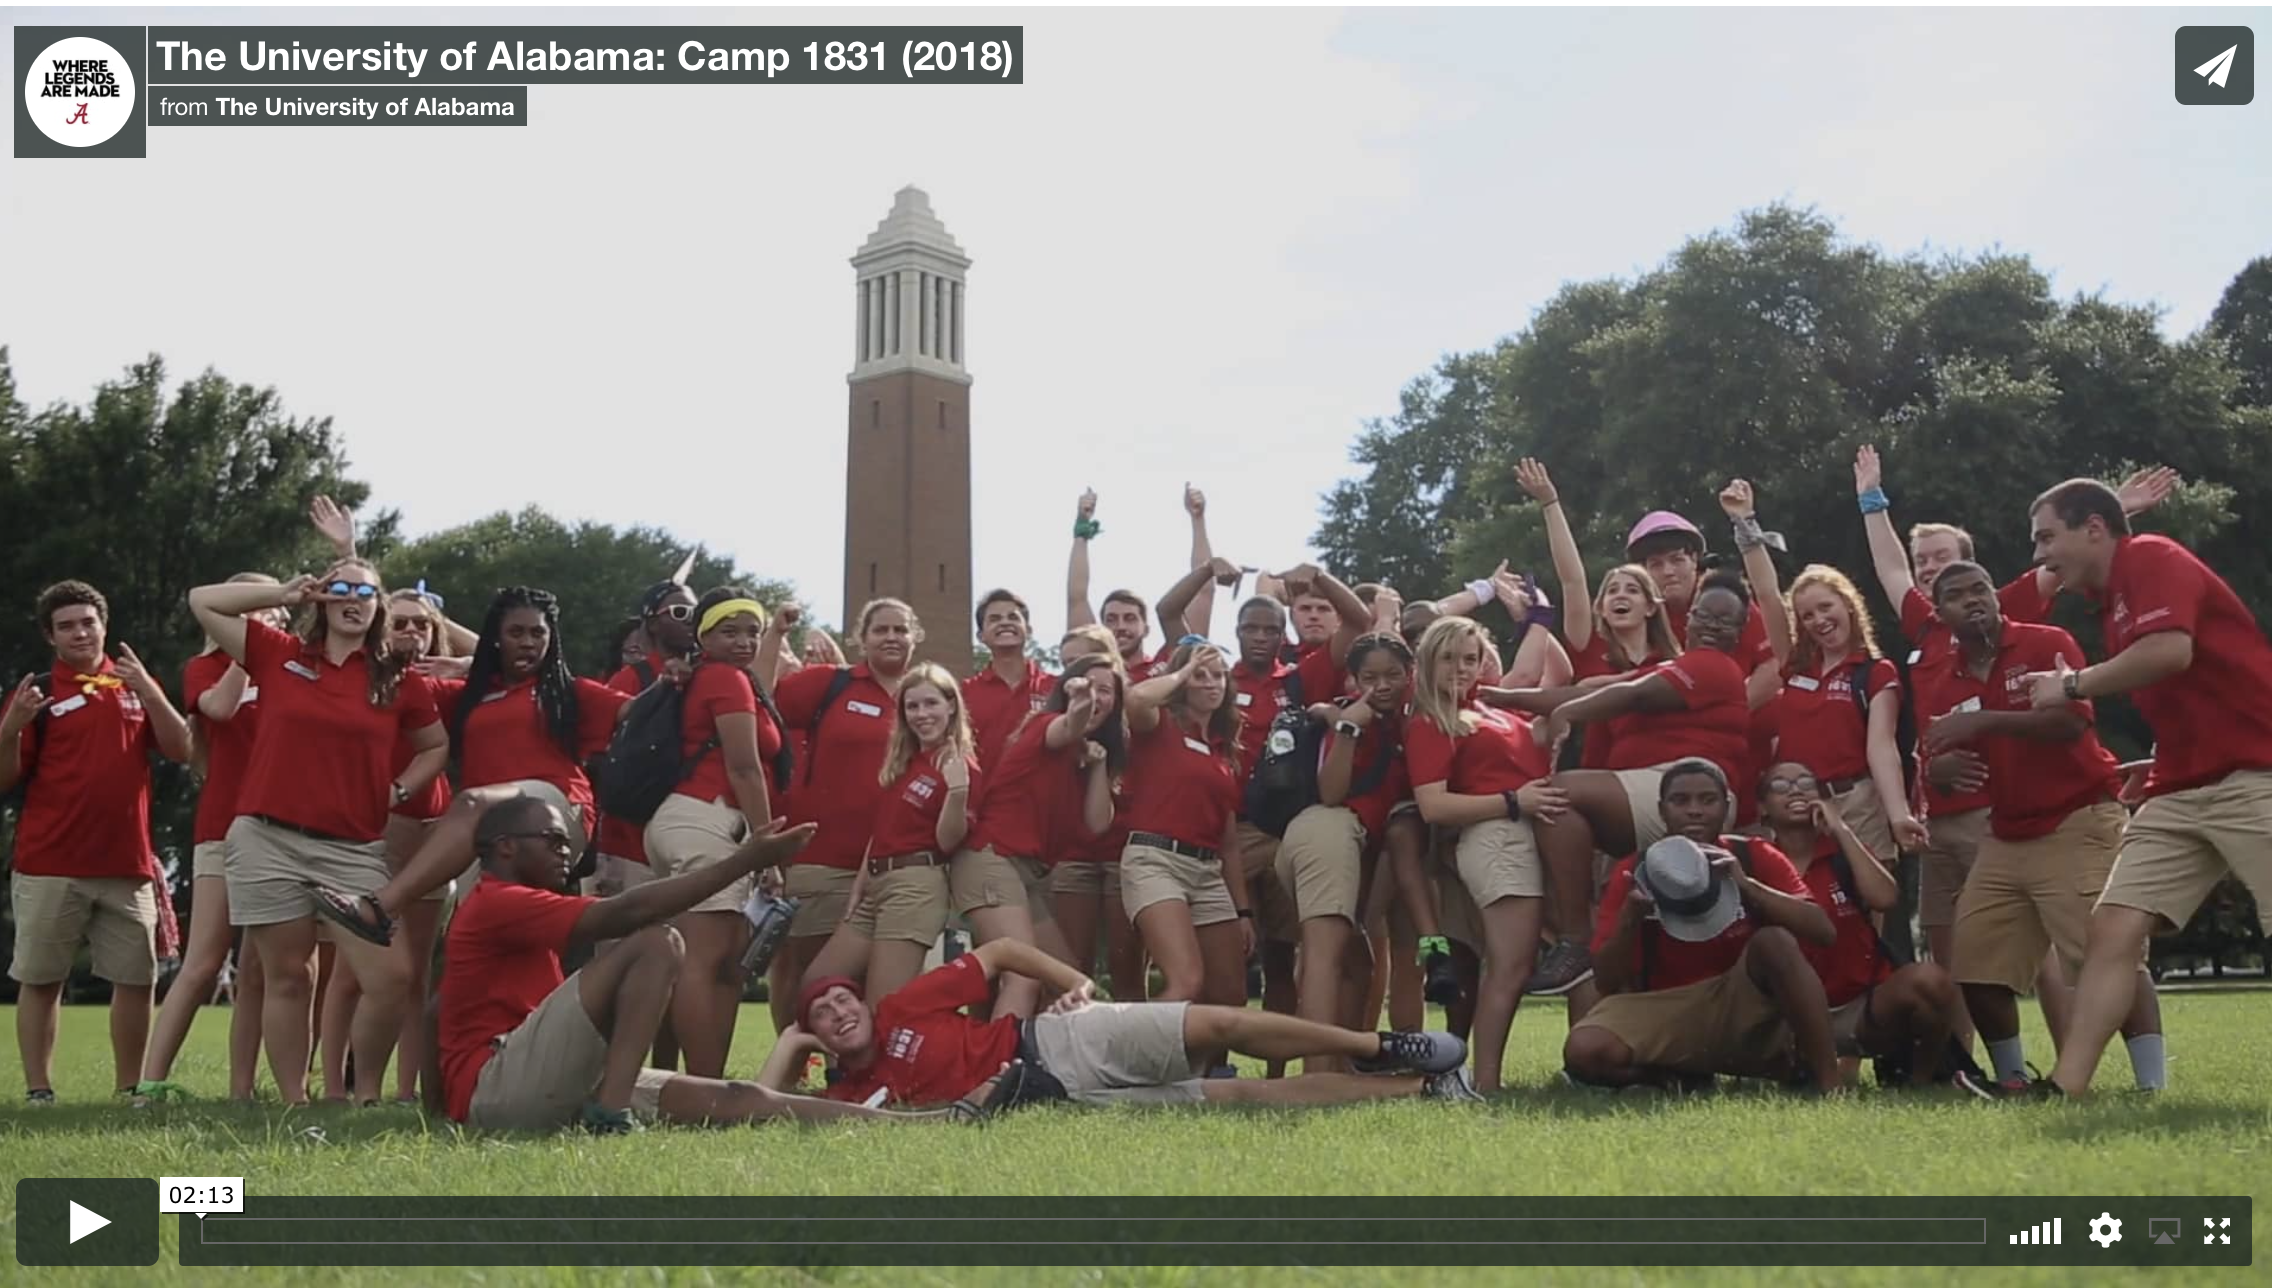 Camp 1831 is What UA’s All About